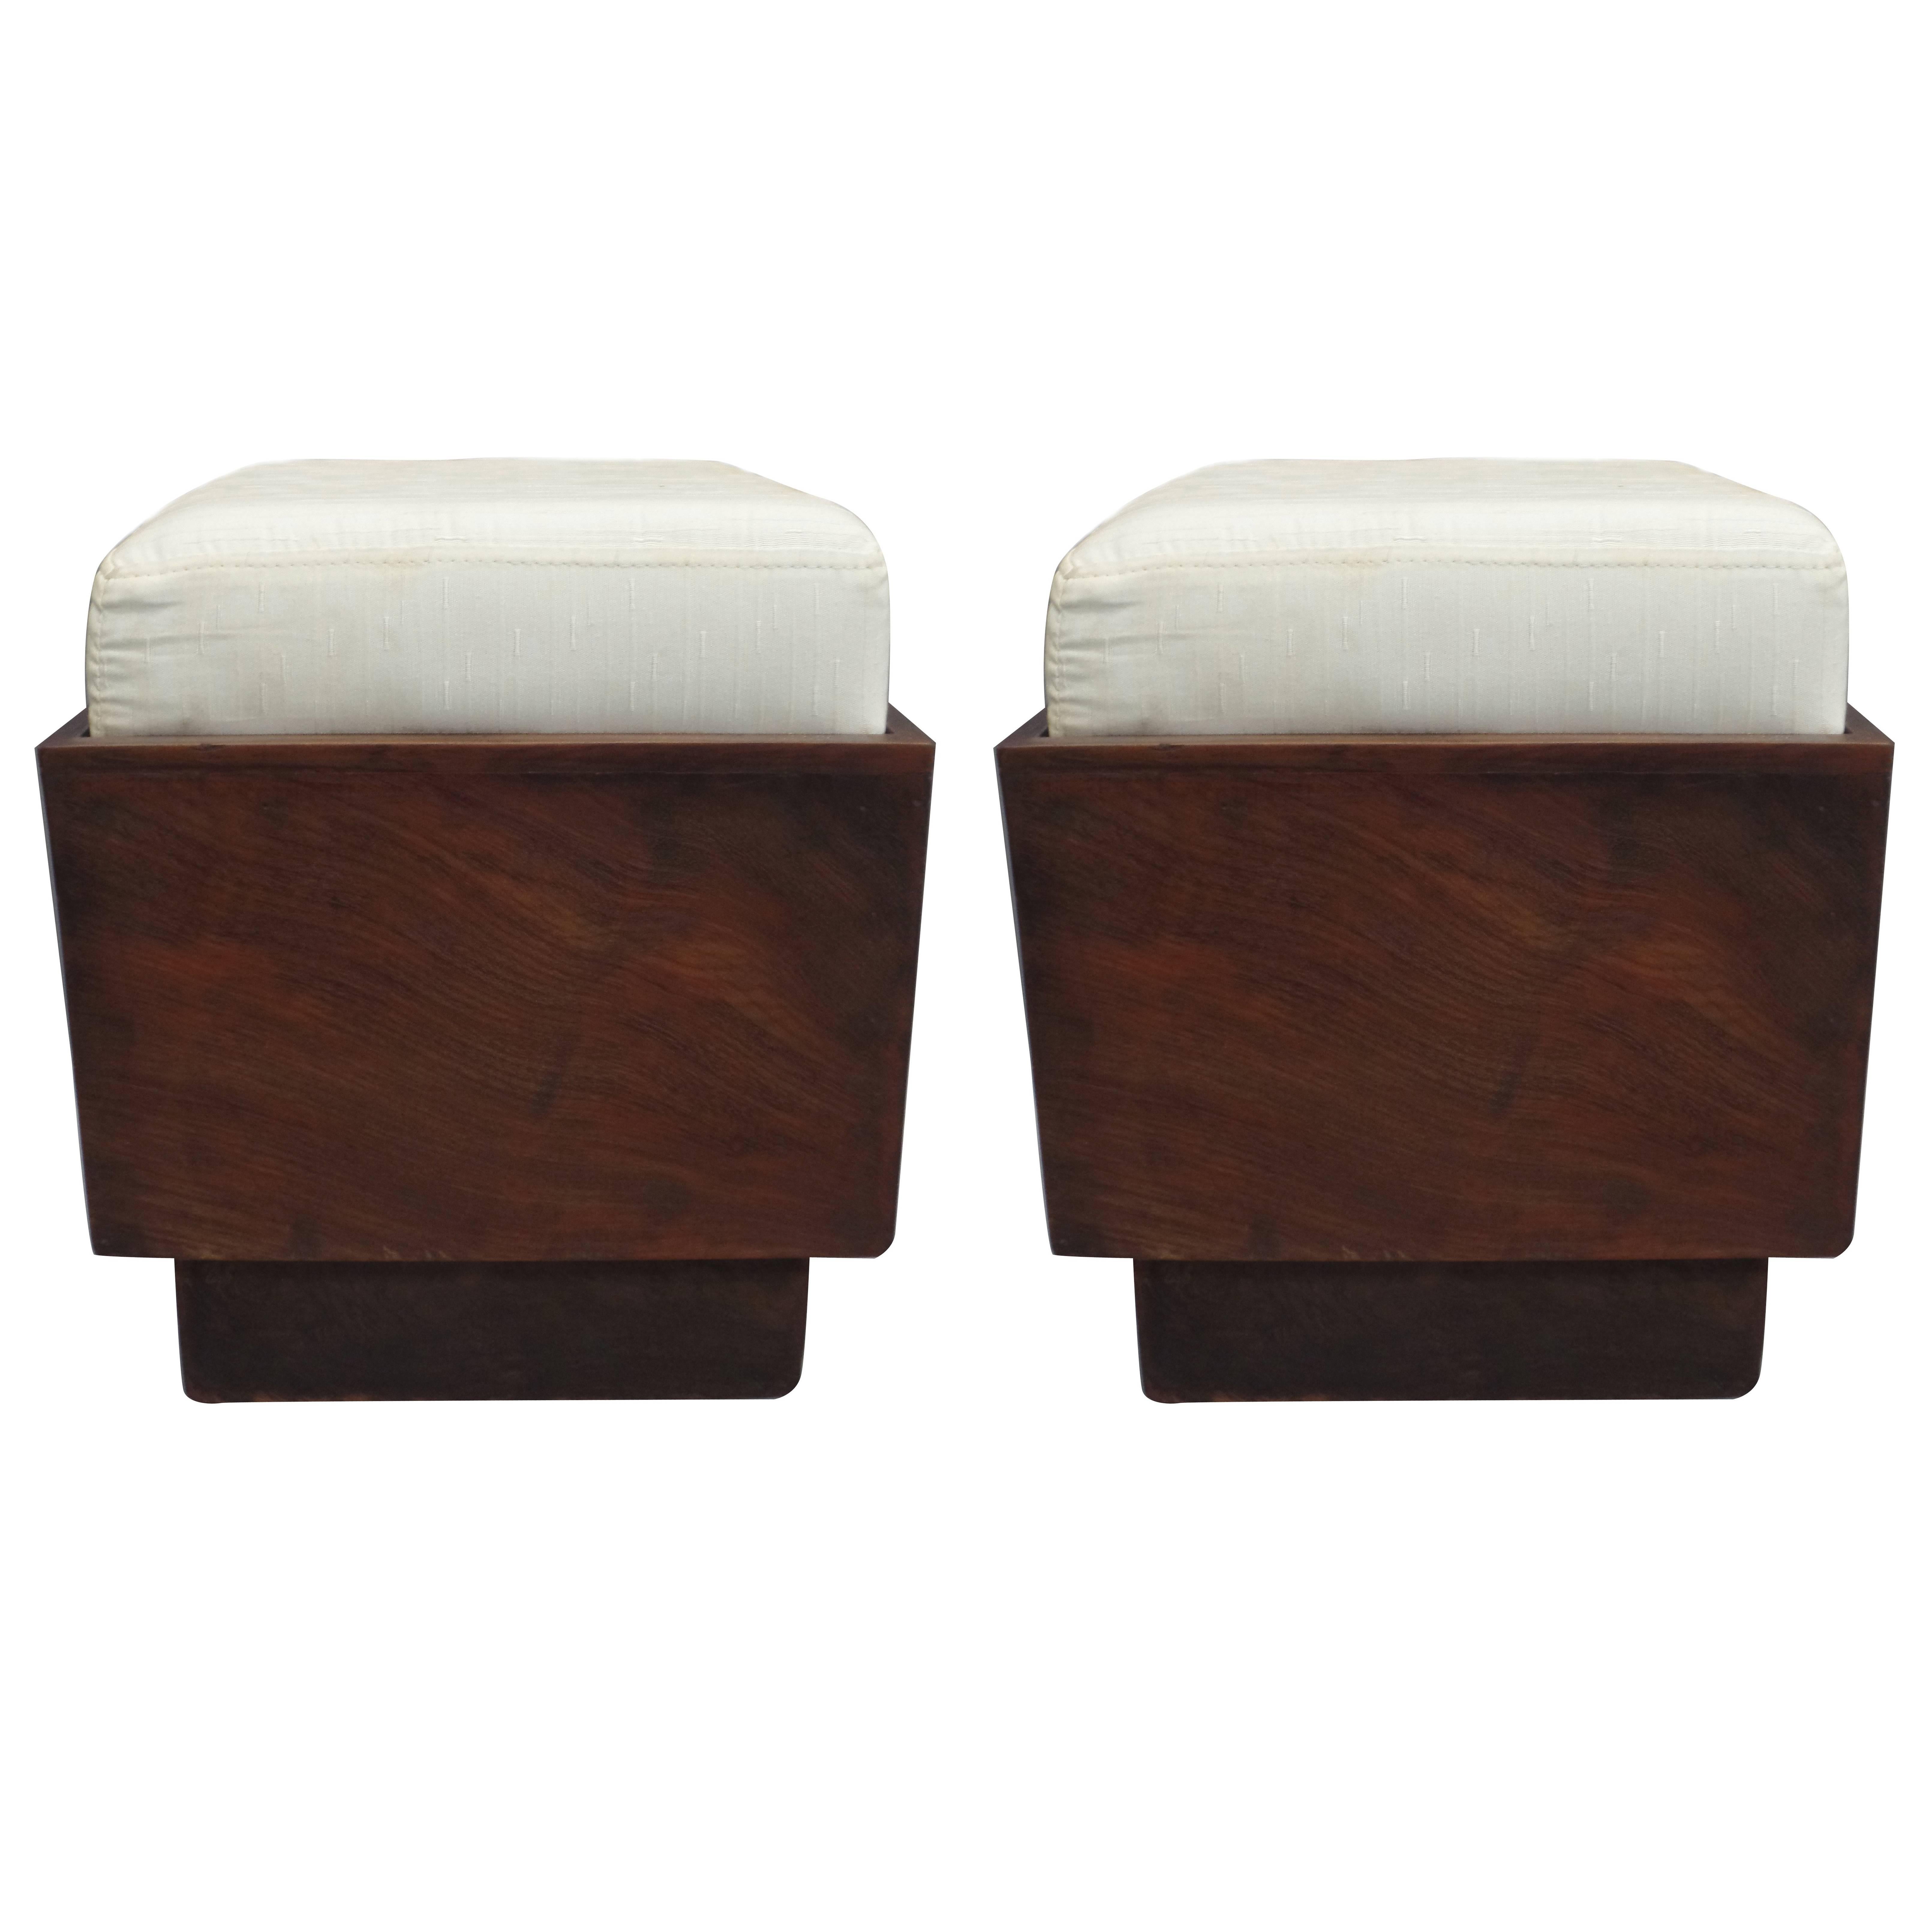 Iconic Pair of French Colonial Stools, French Indochina, 1930